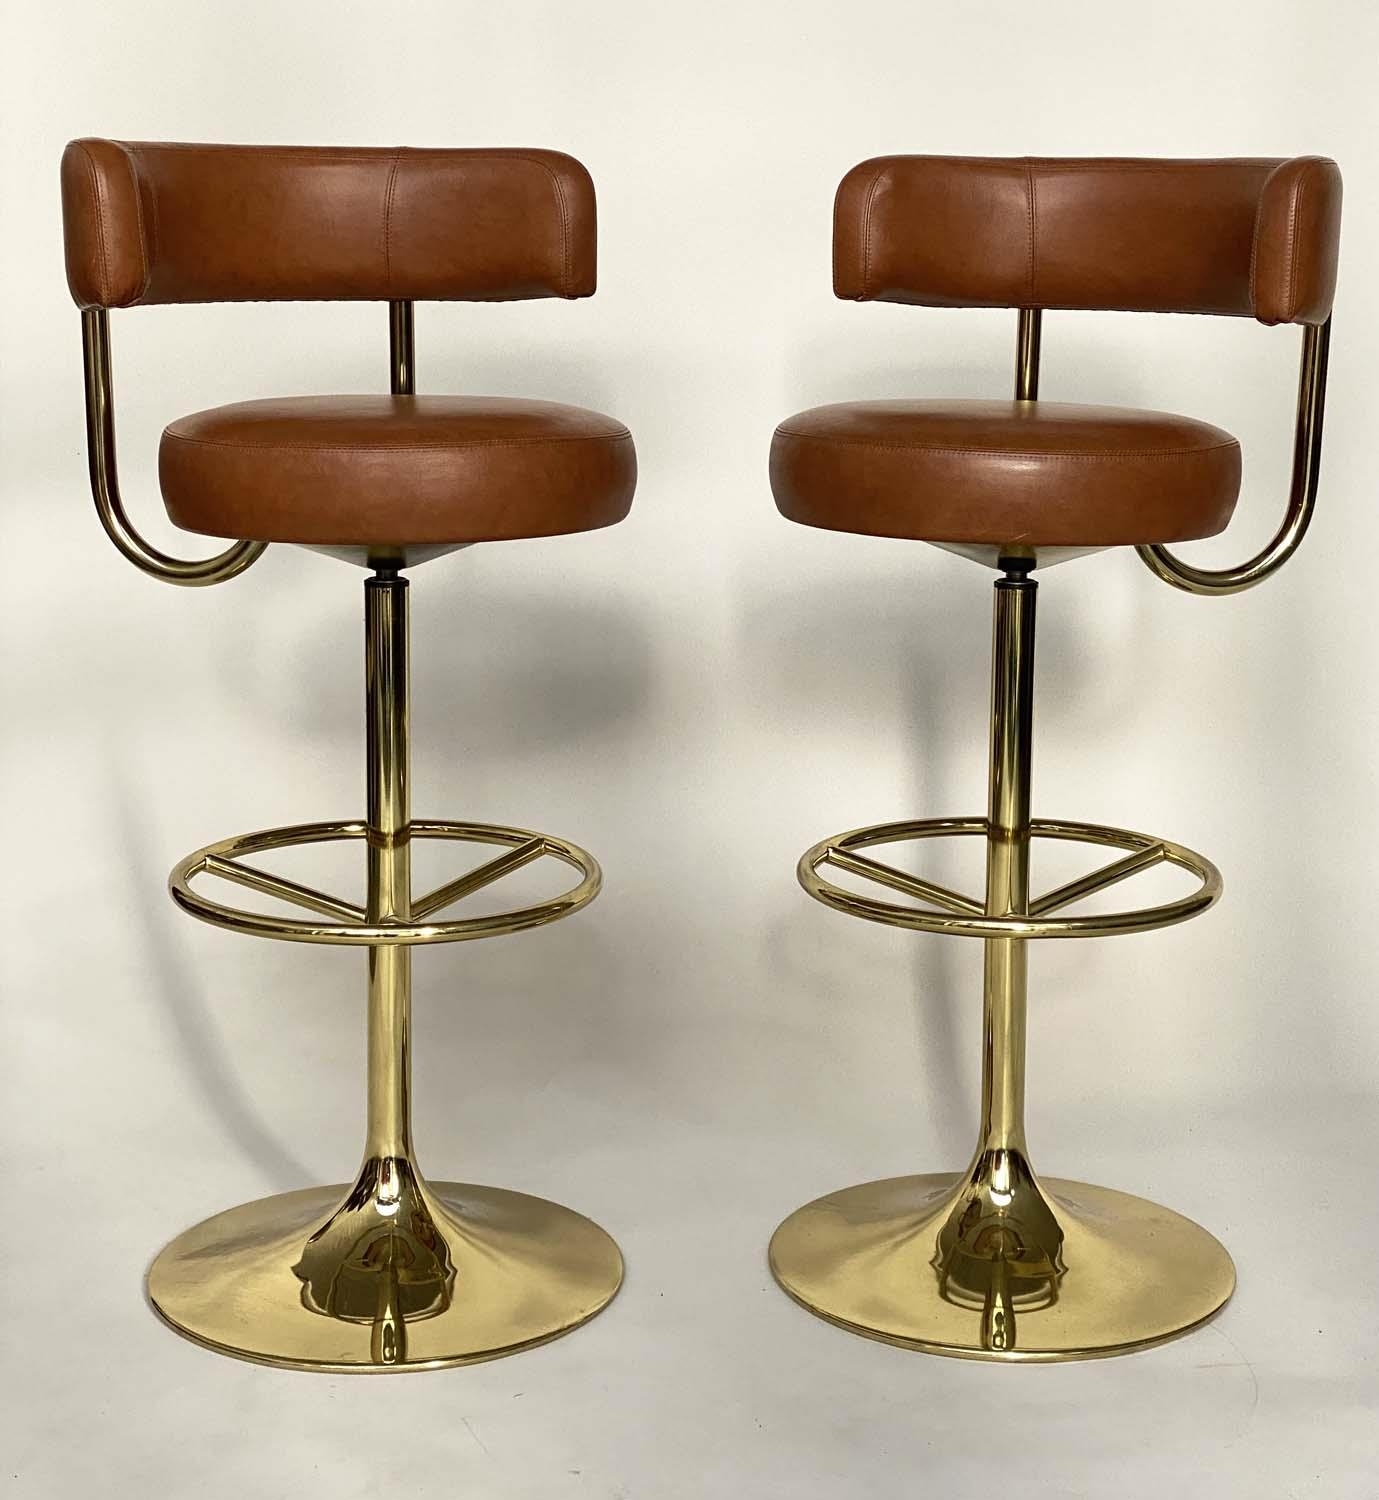 JOHANSON DESIGN SWEDISH BAR STOOLS, a pair, with leather back and seat and gilt brass support, 107cm - Image 5 of 6